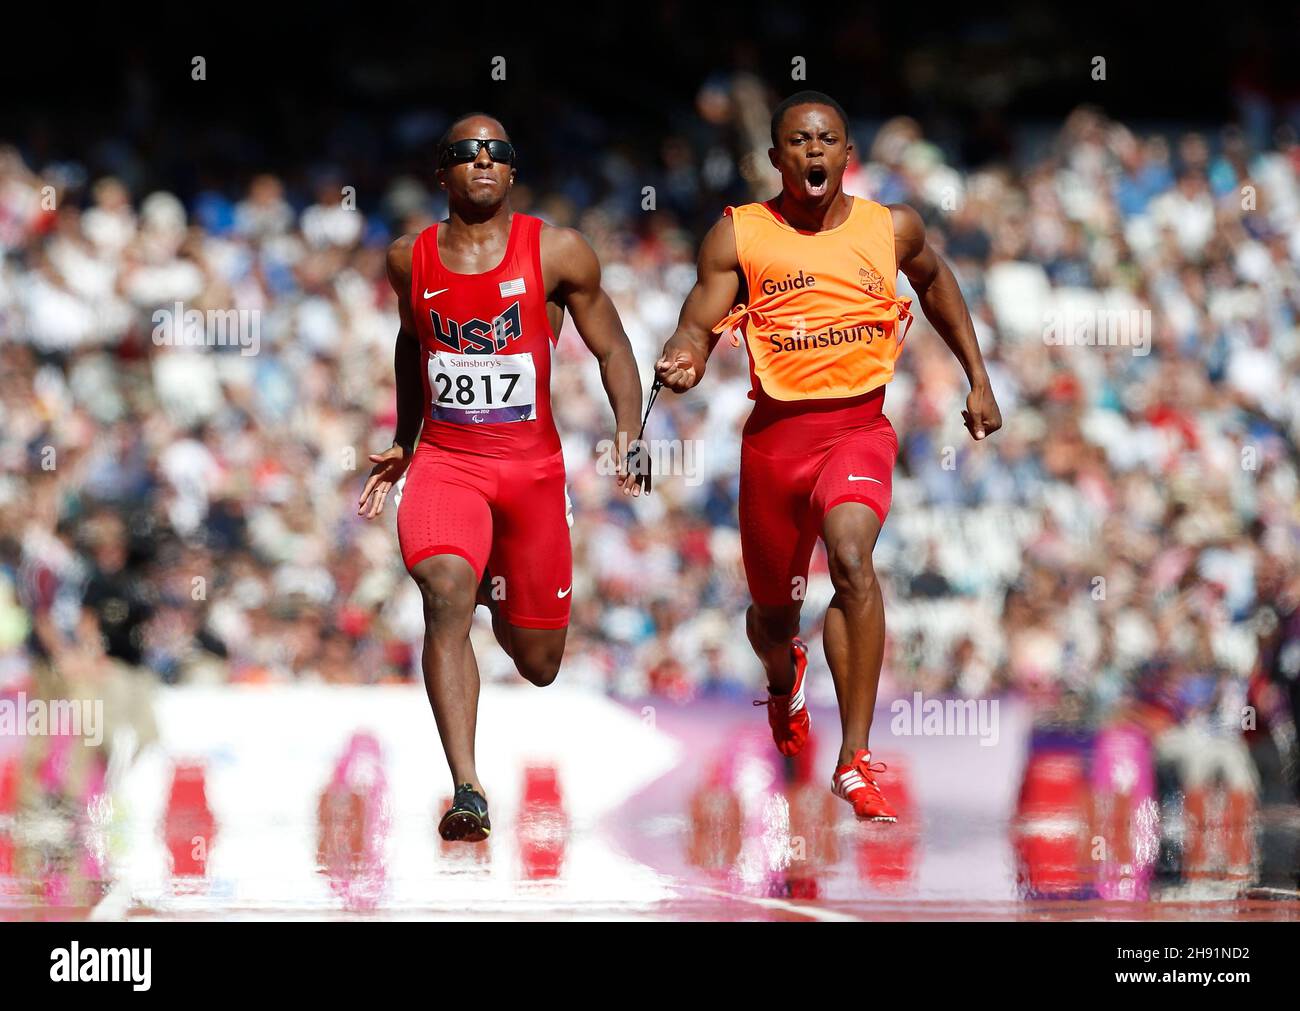 LONDON, England - SEPTEMBER 7: David Brown with guide Rolland Slade (USA) appear to run on water heat haze, running in the Men's 100m T11 Round 1 during day 9 of the London 2012 Paralympic Games at the Olympic Stadium on September 7, 2012 in London, England. Photo by Paul Cunningham Stock Photo